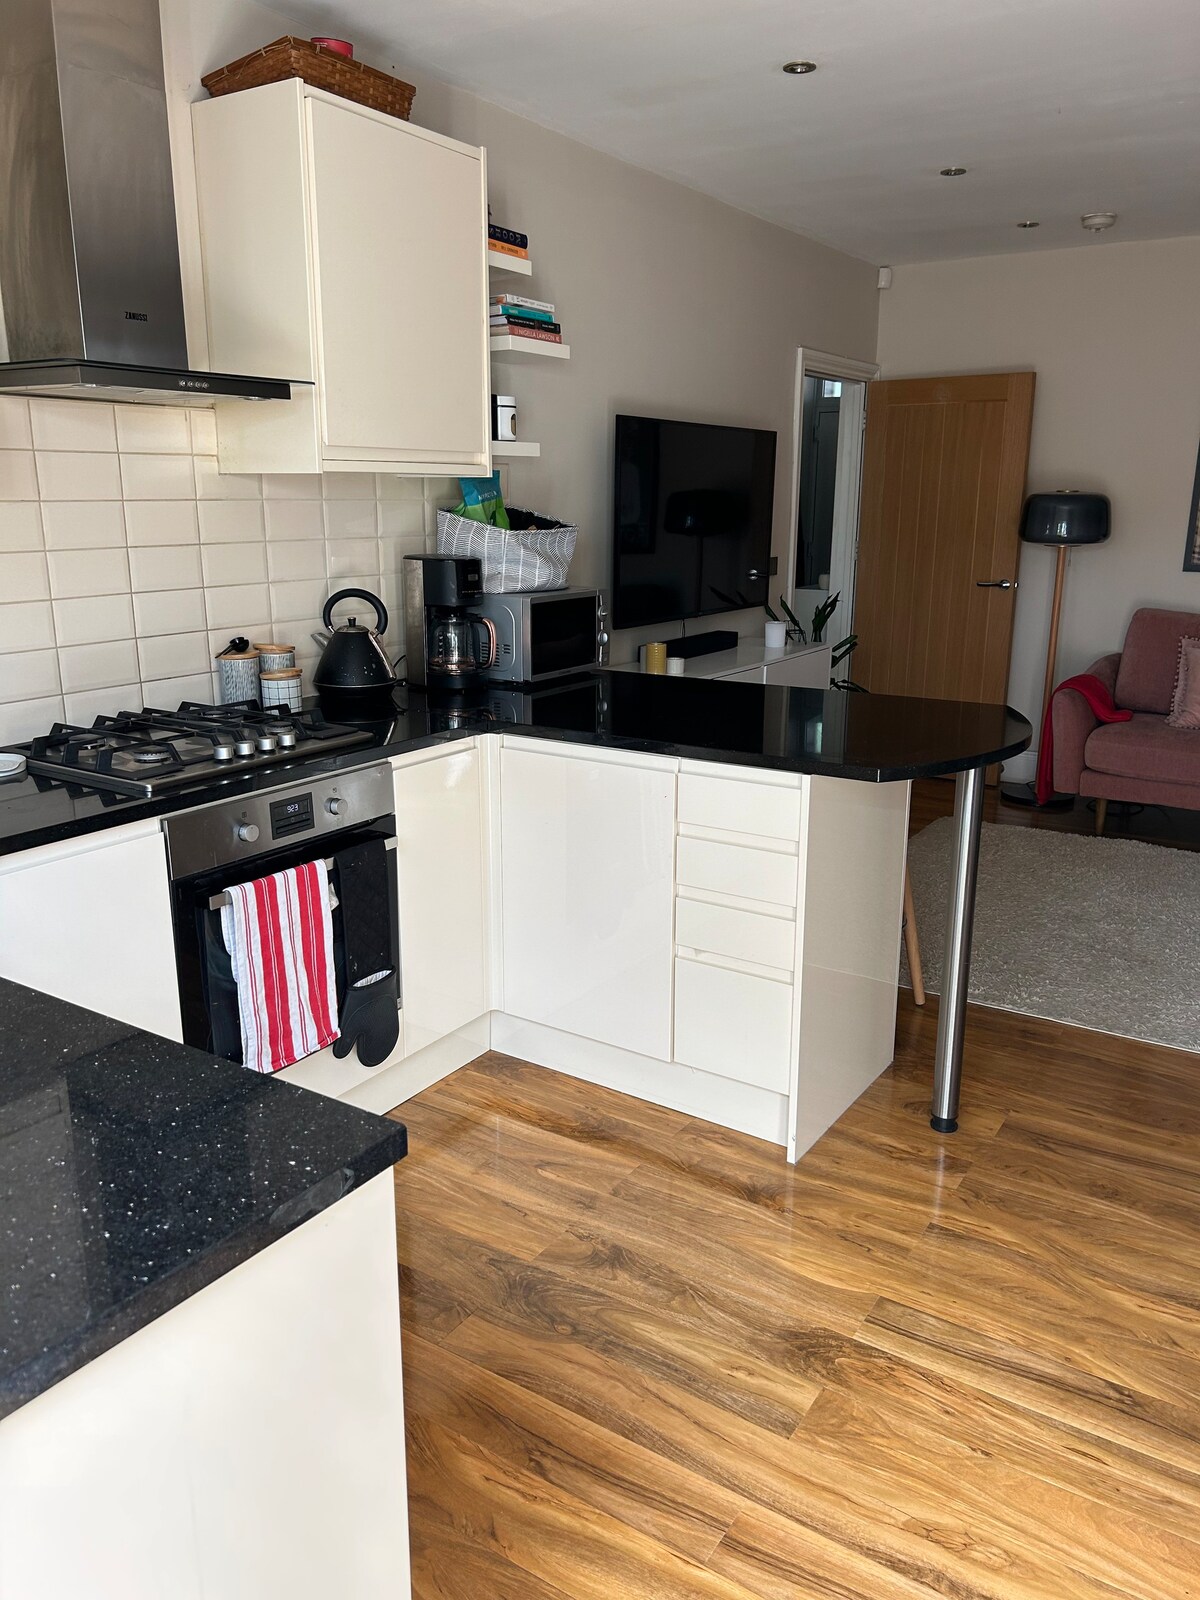 Stylish flat in Morden - 5 min to the tube